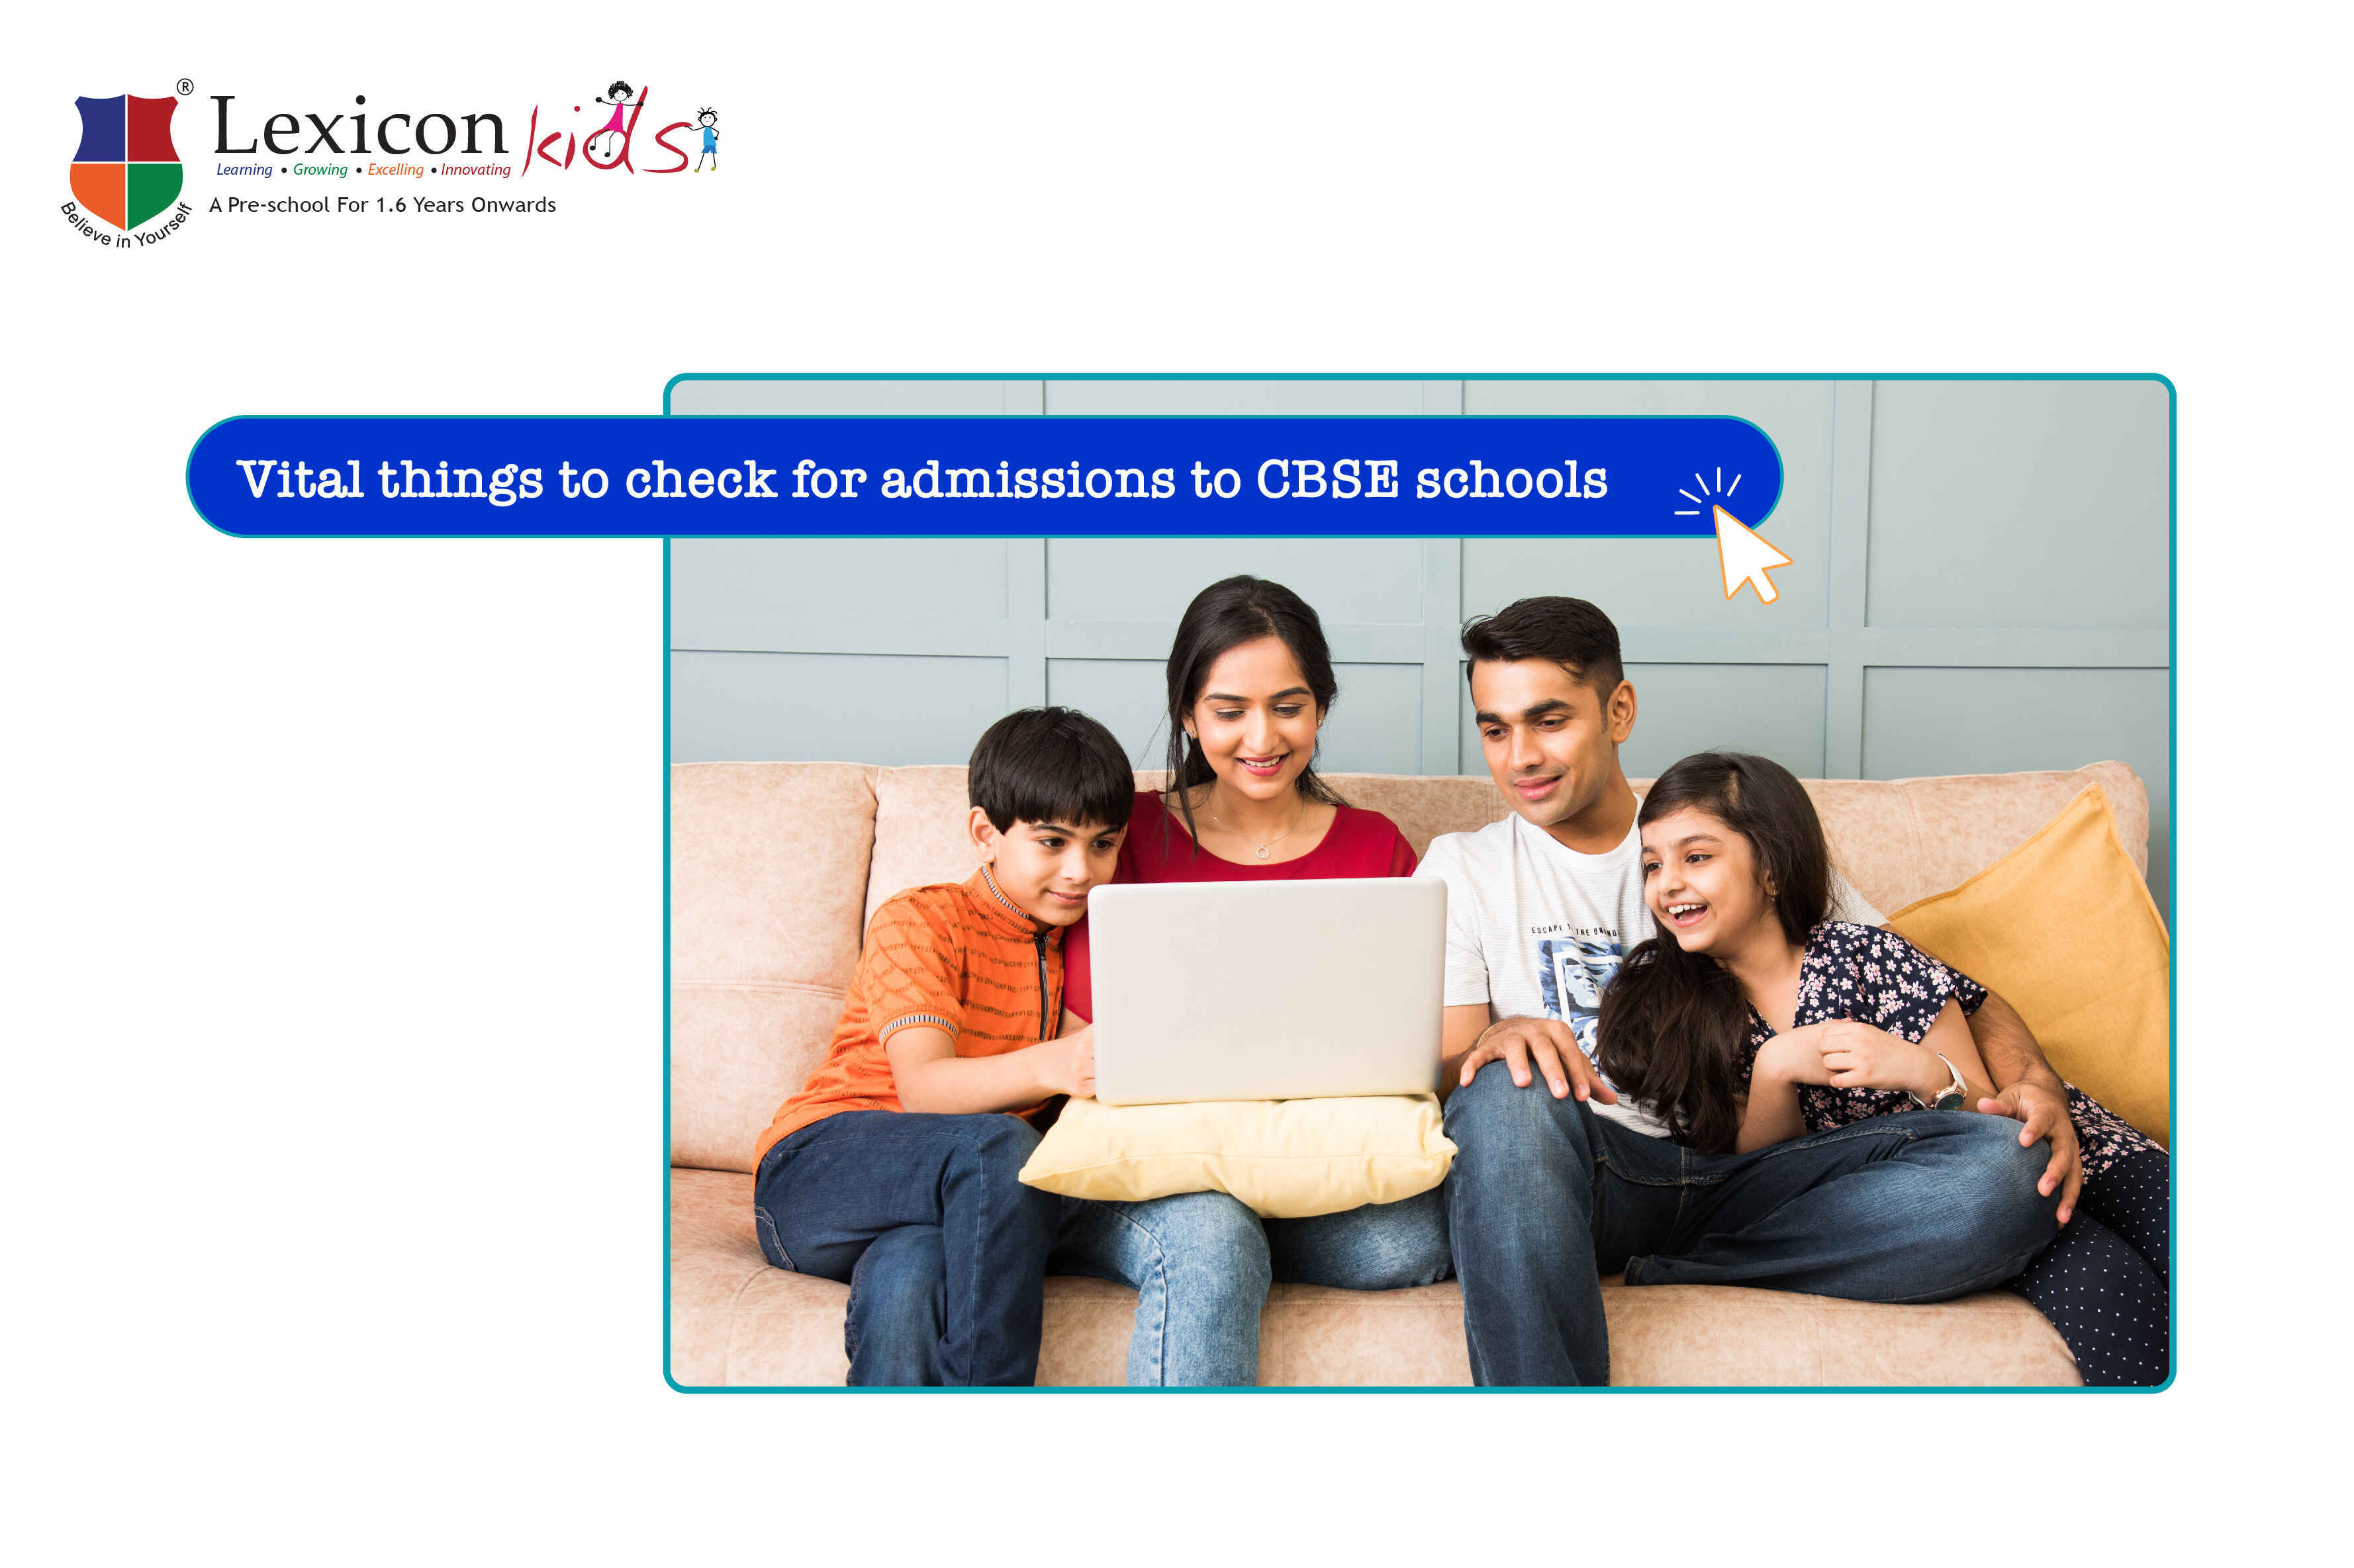 Vital things to check for admission to CBSE